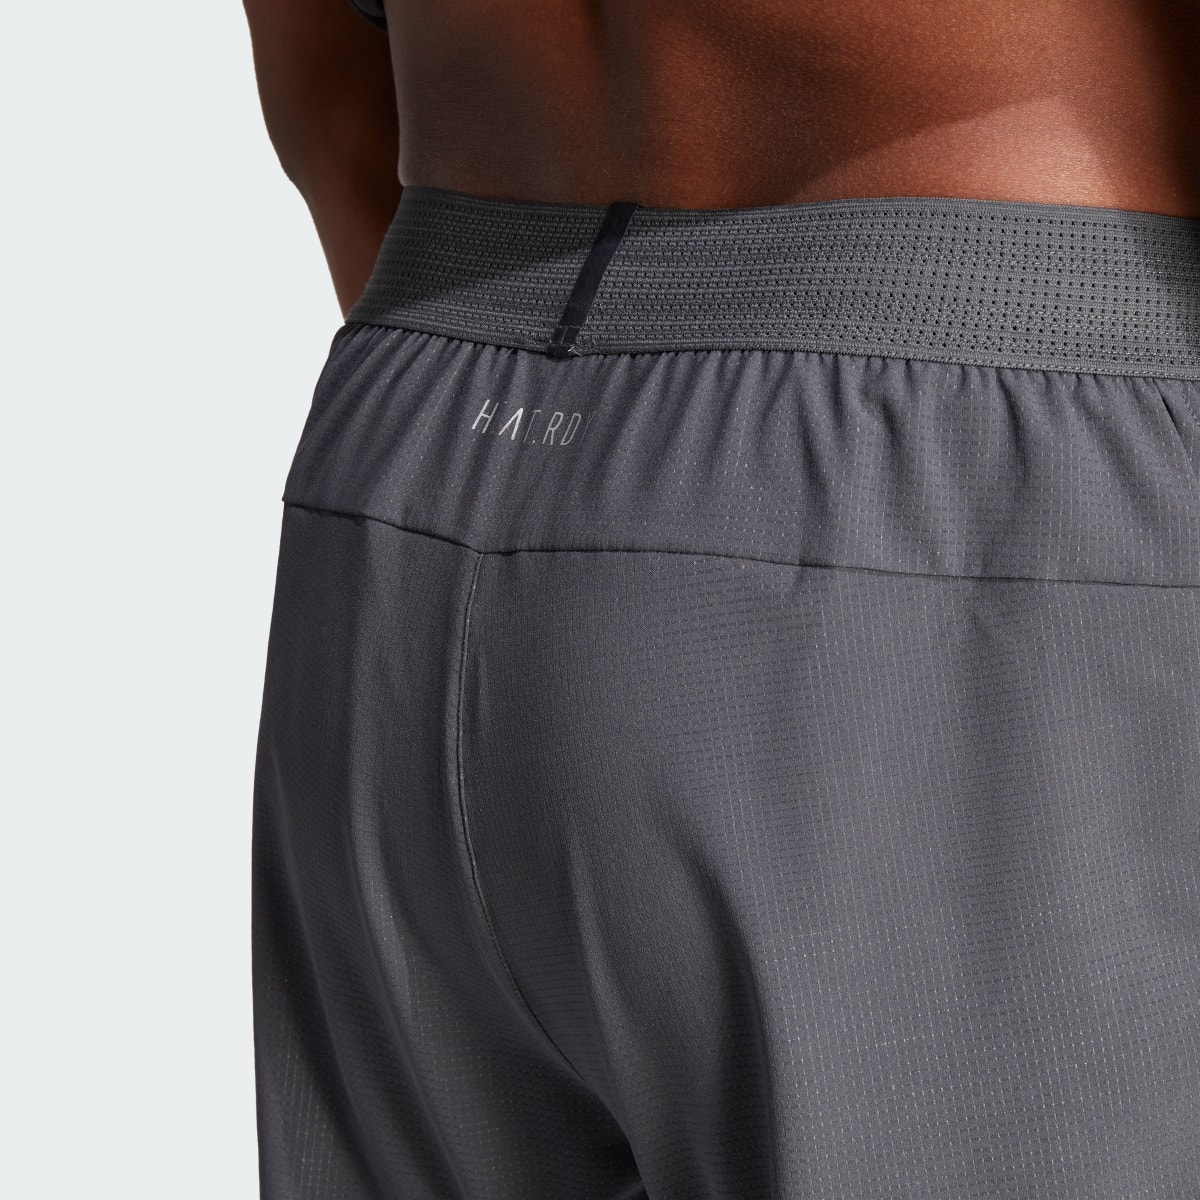 Adidas HEAT.RDY HIIT Elevated Training 2-in-1 Shorts. 8